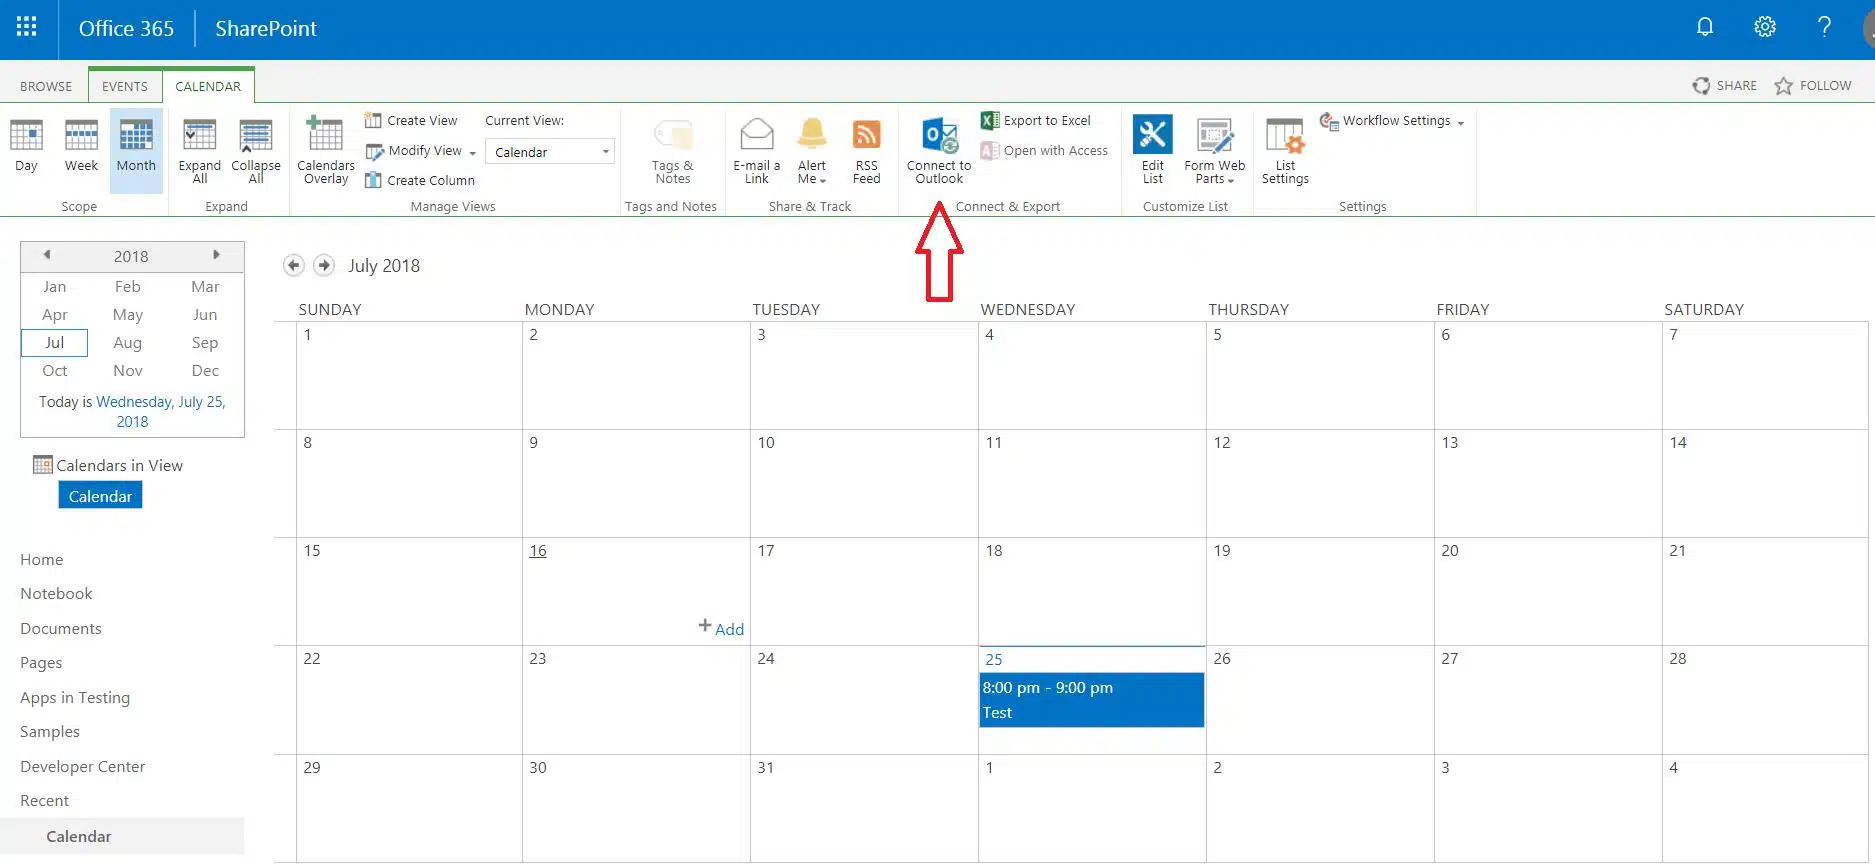 Find the Connect to Outlook feature from the group "Connect & Export" on the ribbon and click on it to sync SharePoint calendar with outlook